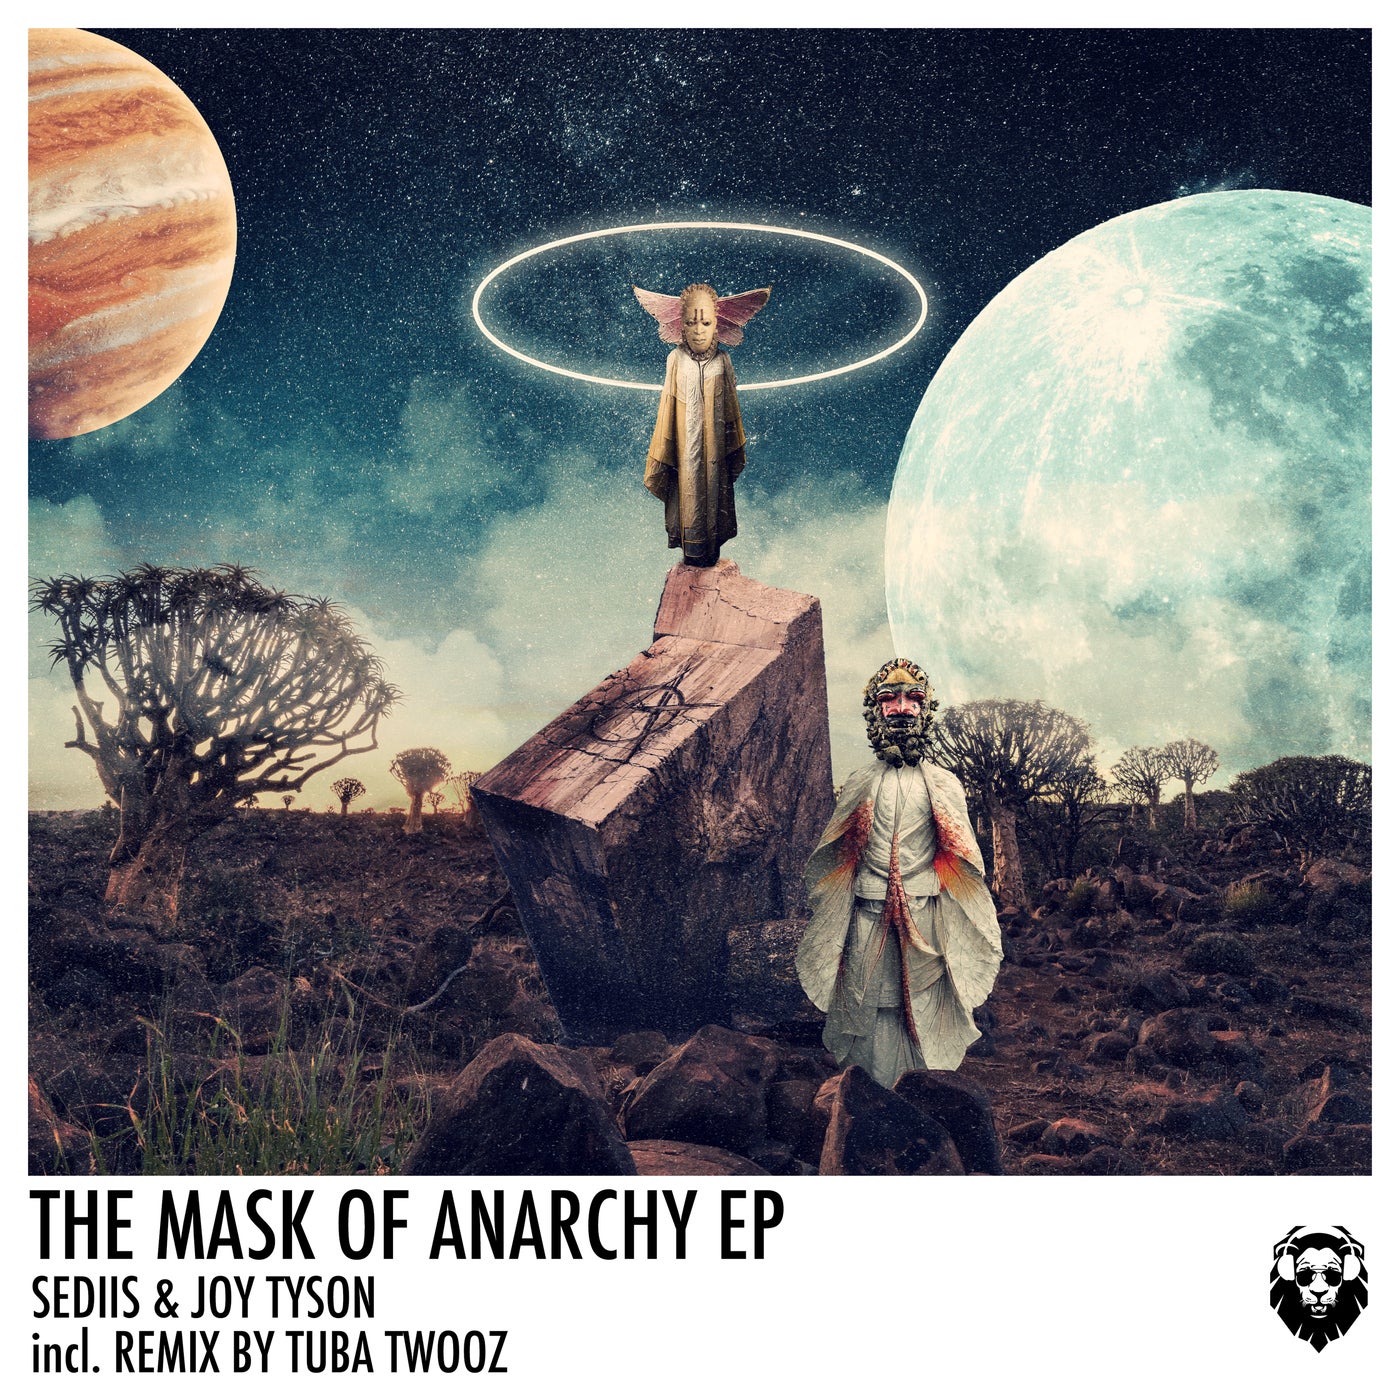 The Mask of Anarchy